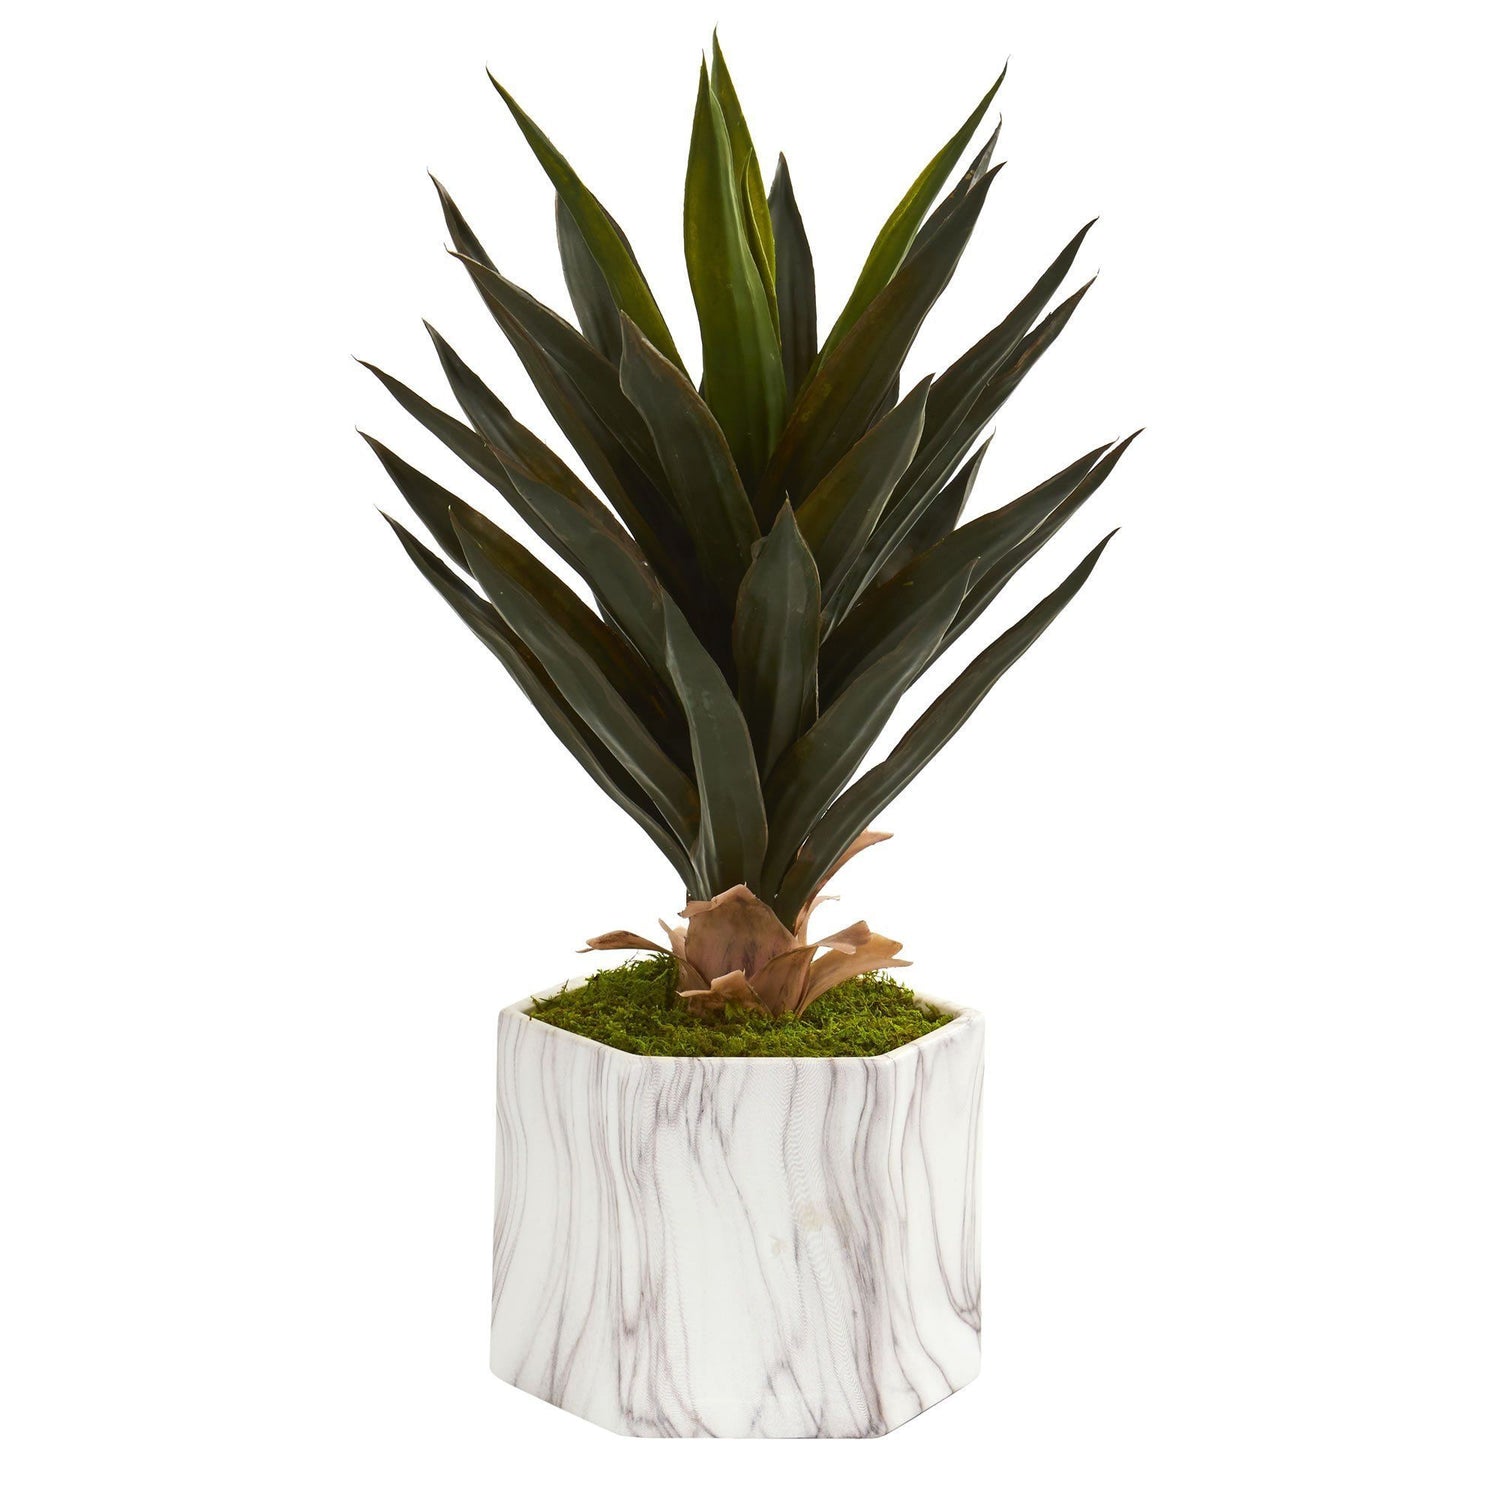 21" Agave Artificial Plant in Marble Finish Pot"